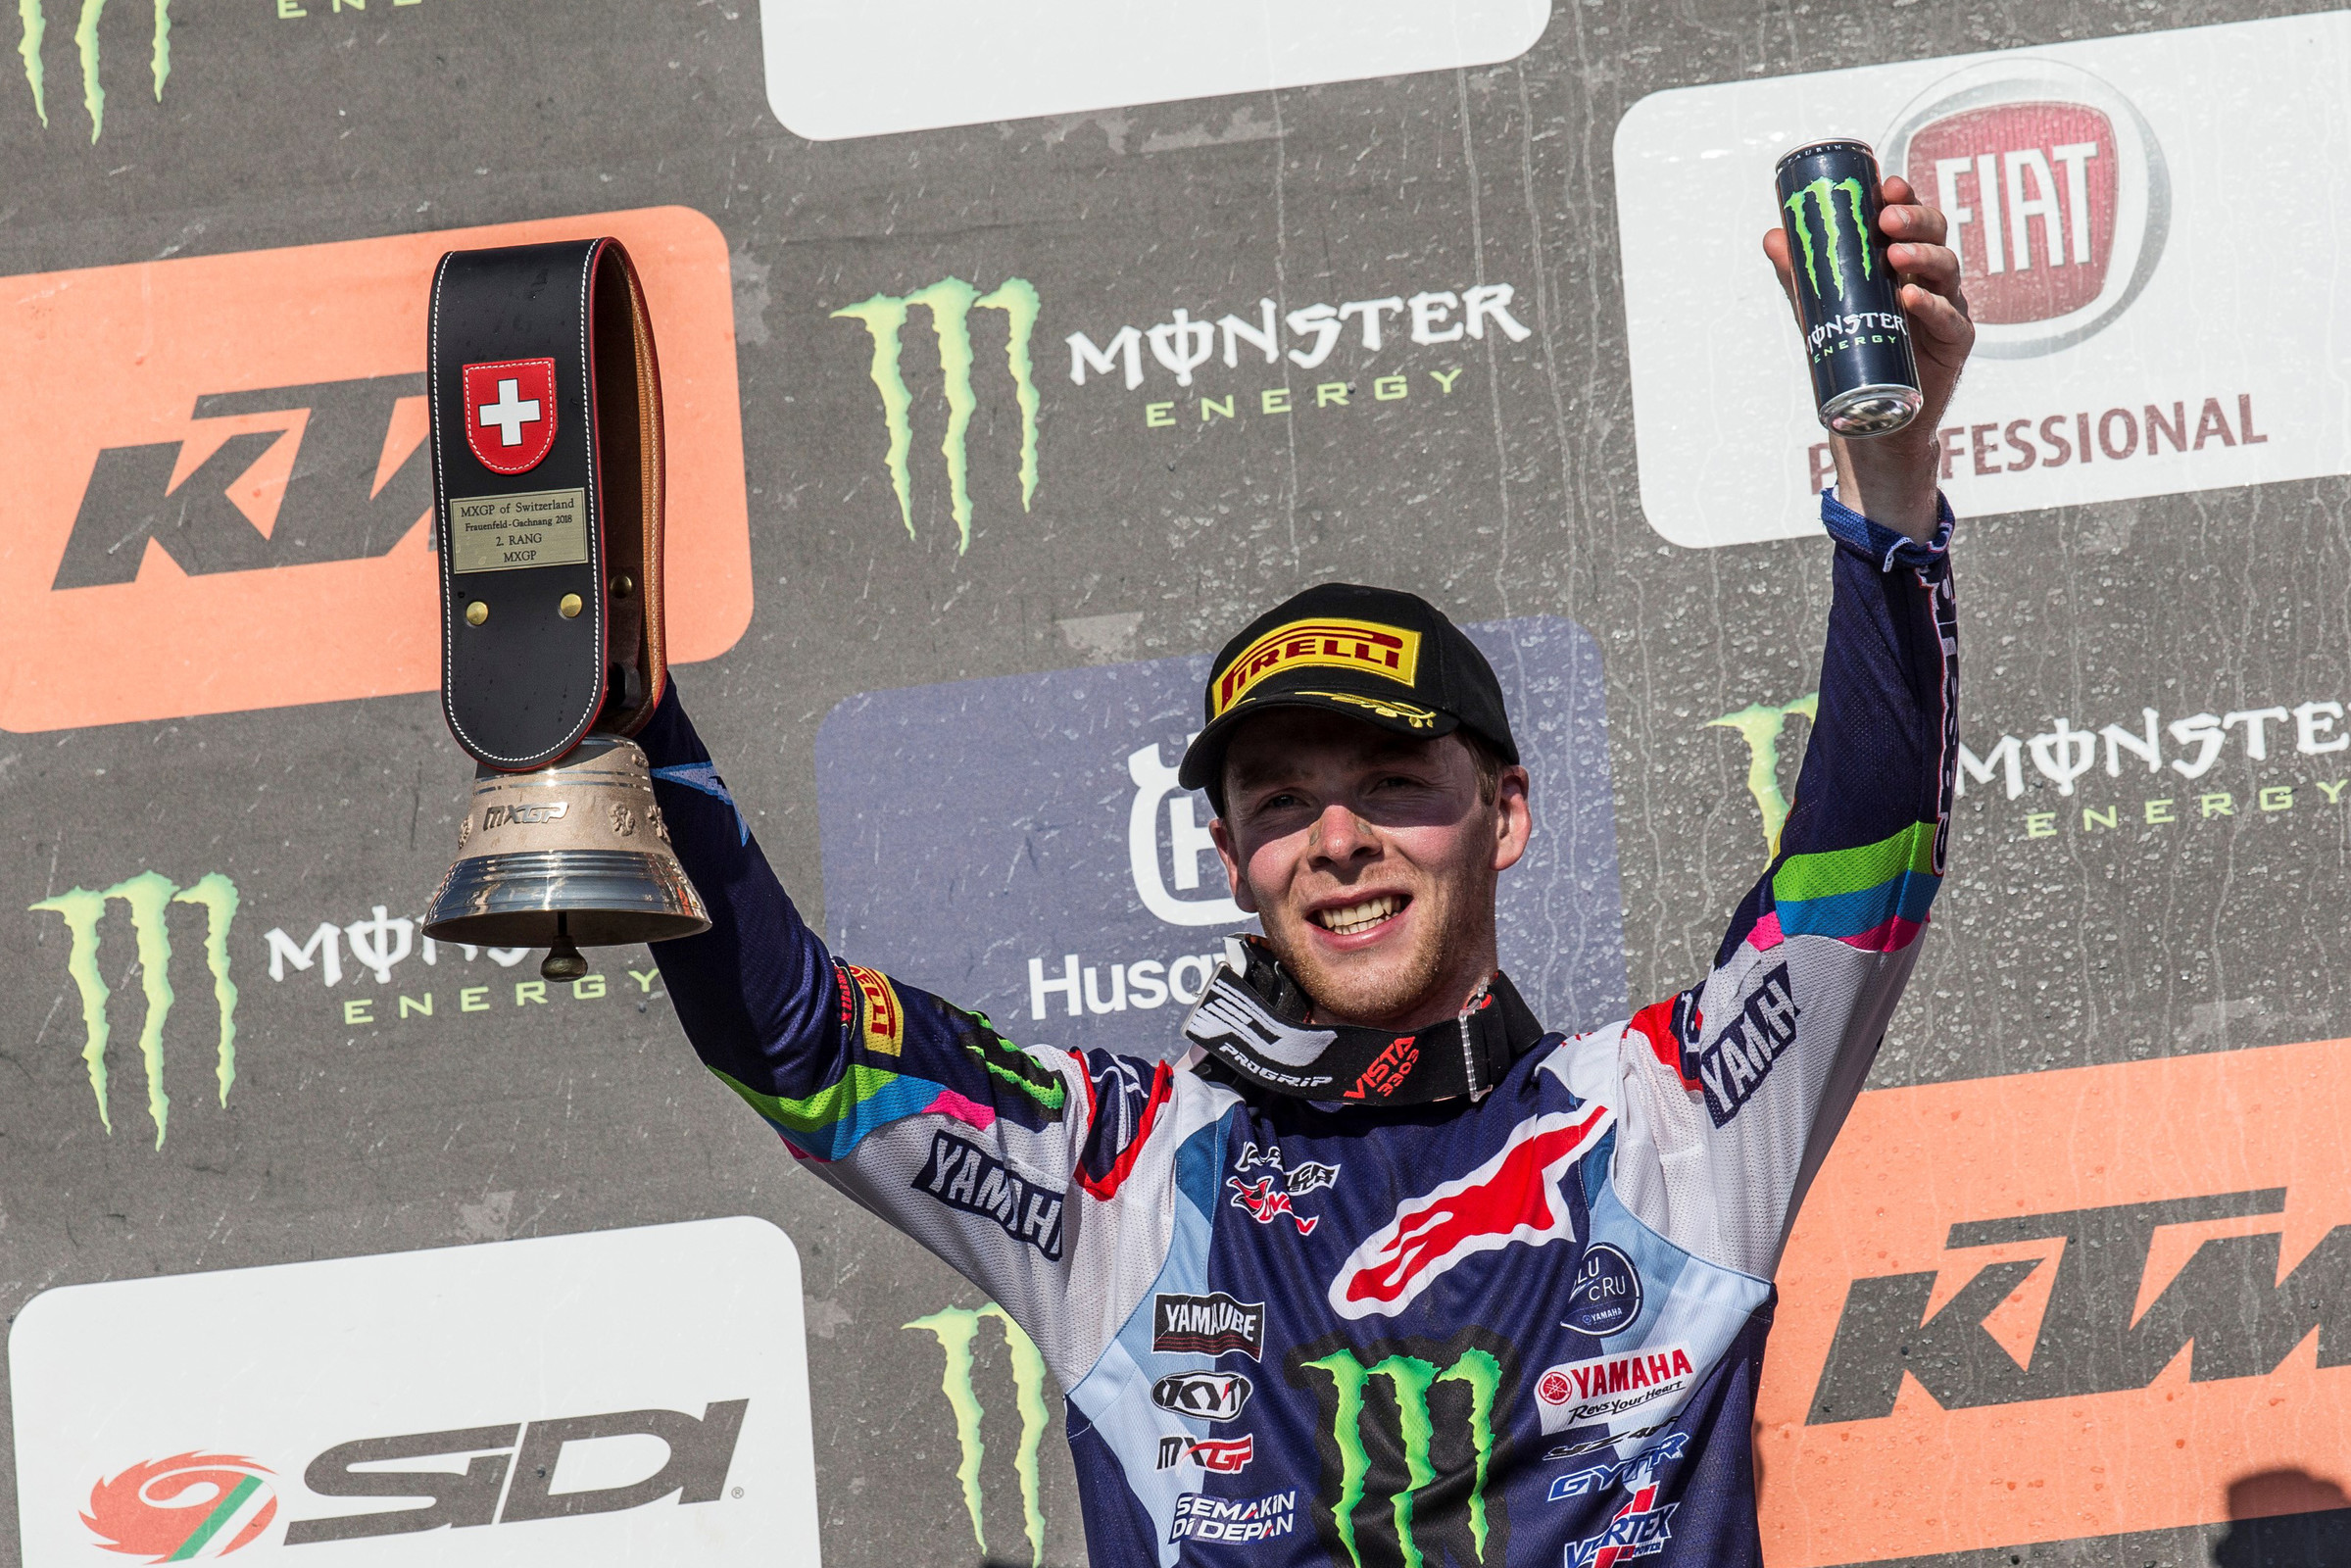 3 Things We Learned from the MXGP of Switzerland - Racer X